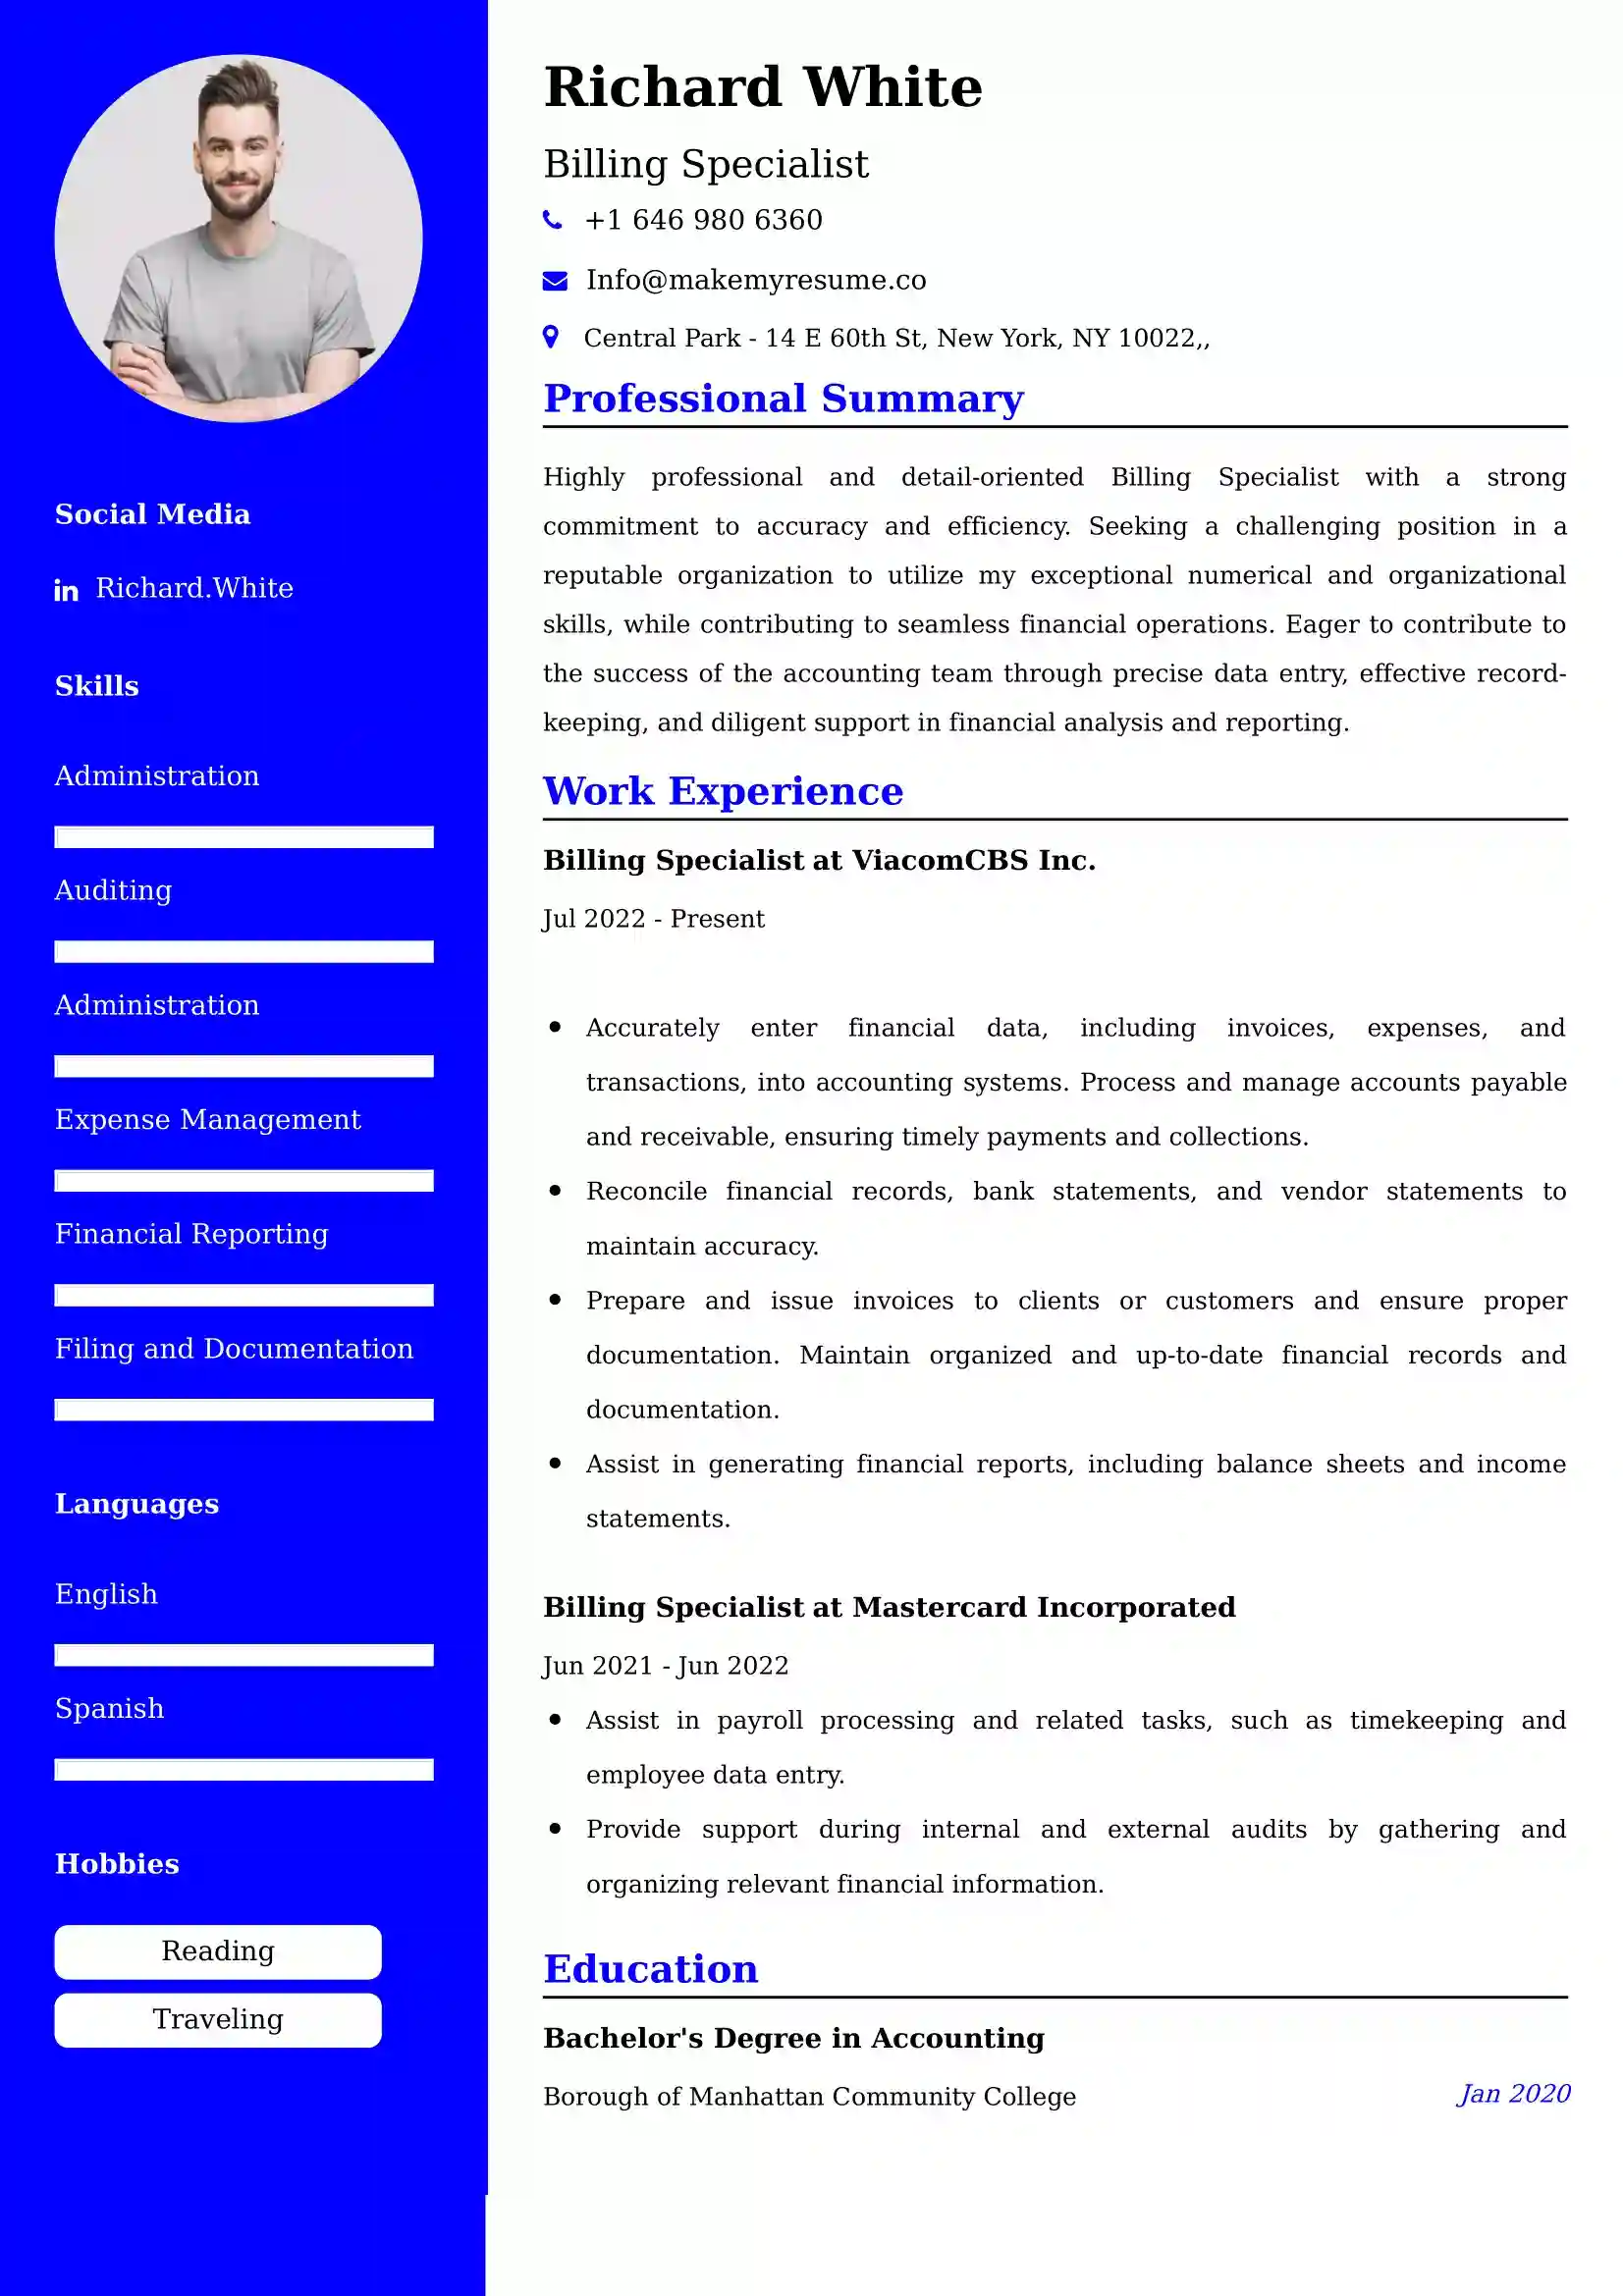 Billing Specialist Resume Examples - Brazilian Format, Latest Template